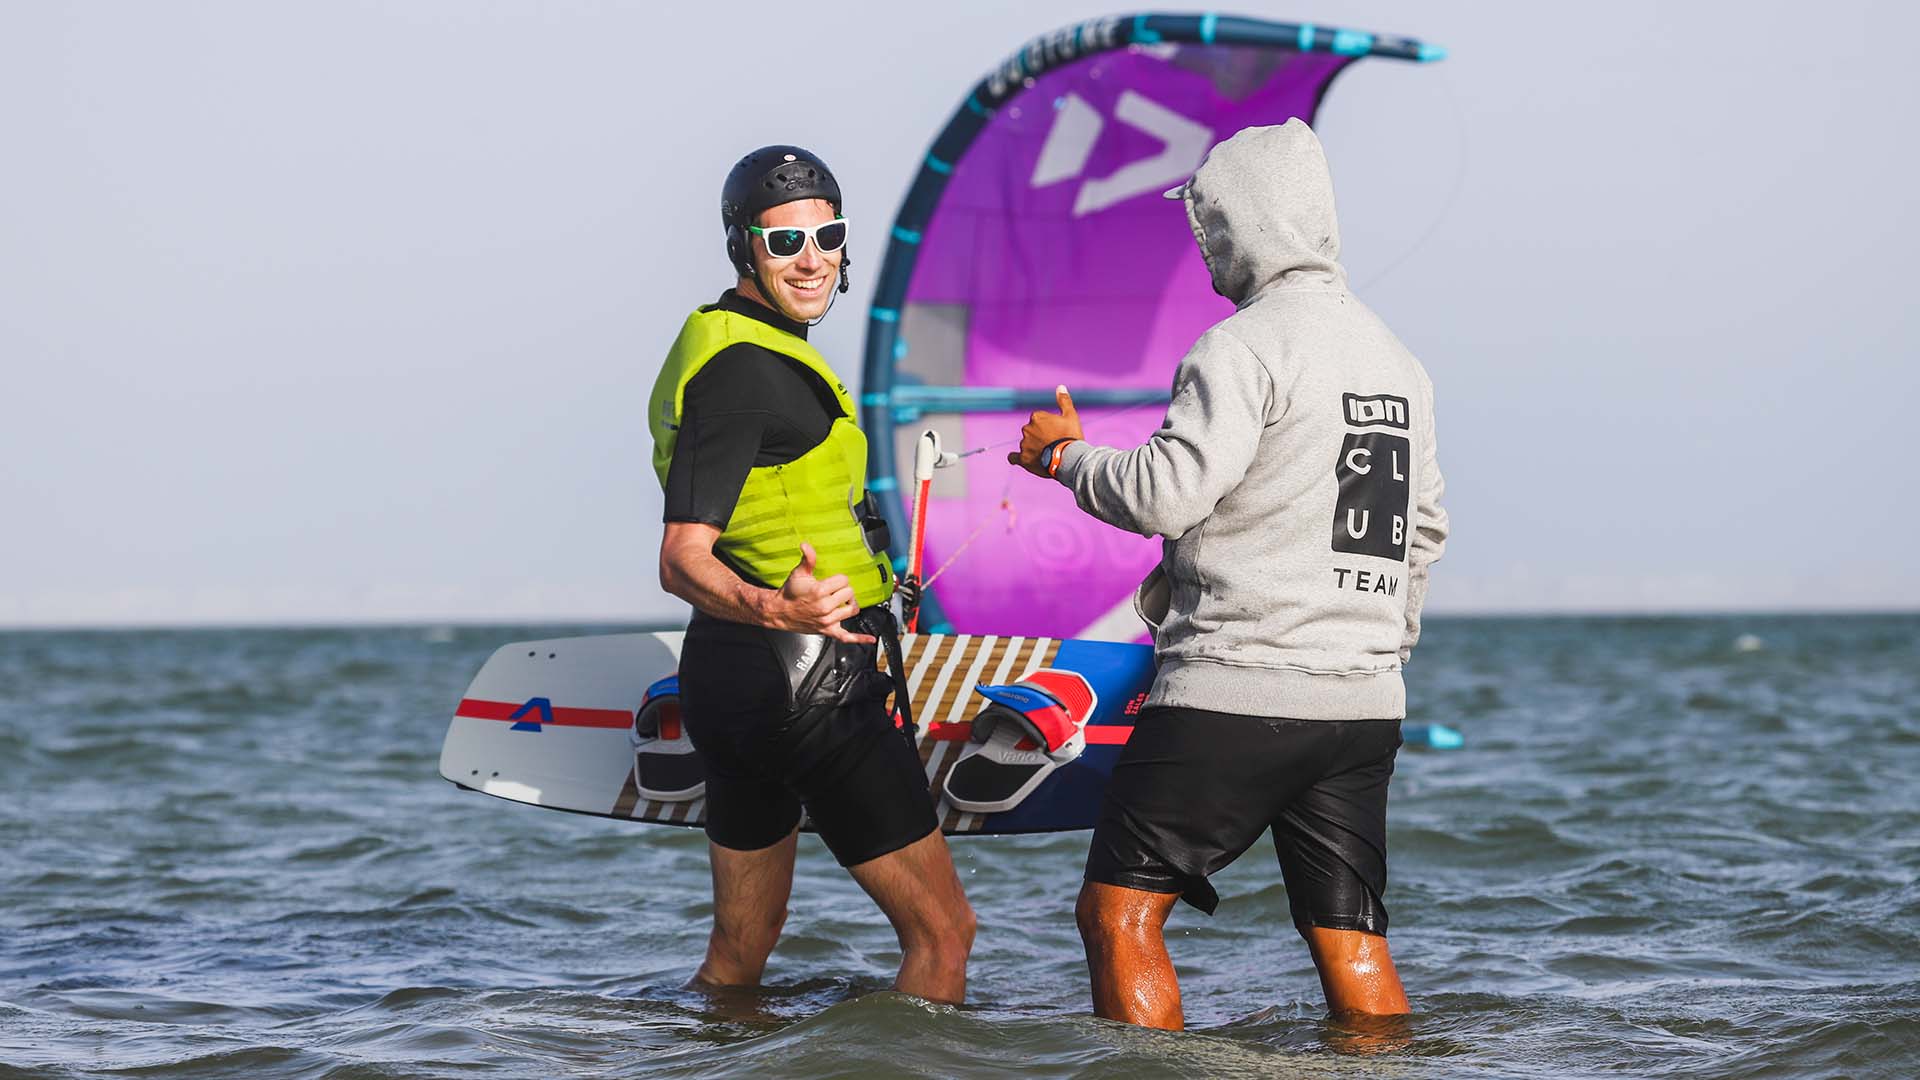 kitesurf lessons with happy client in lassarga